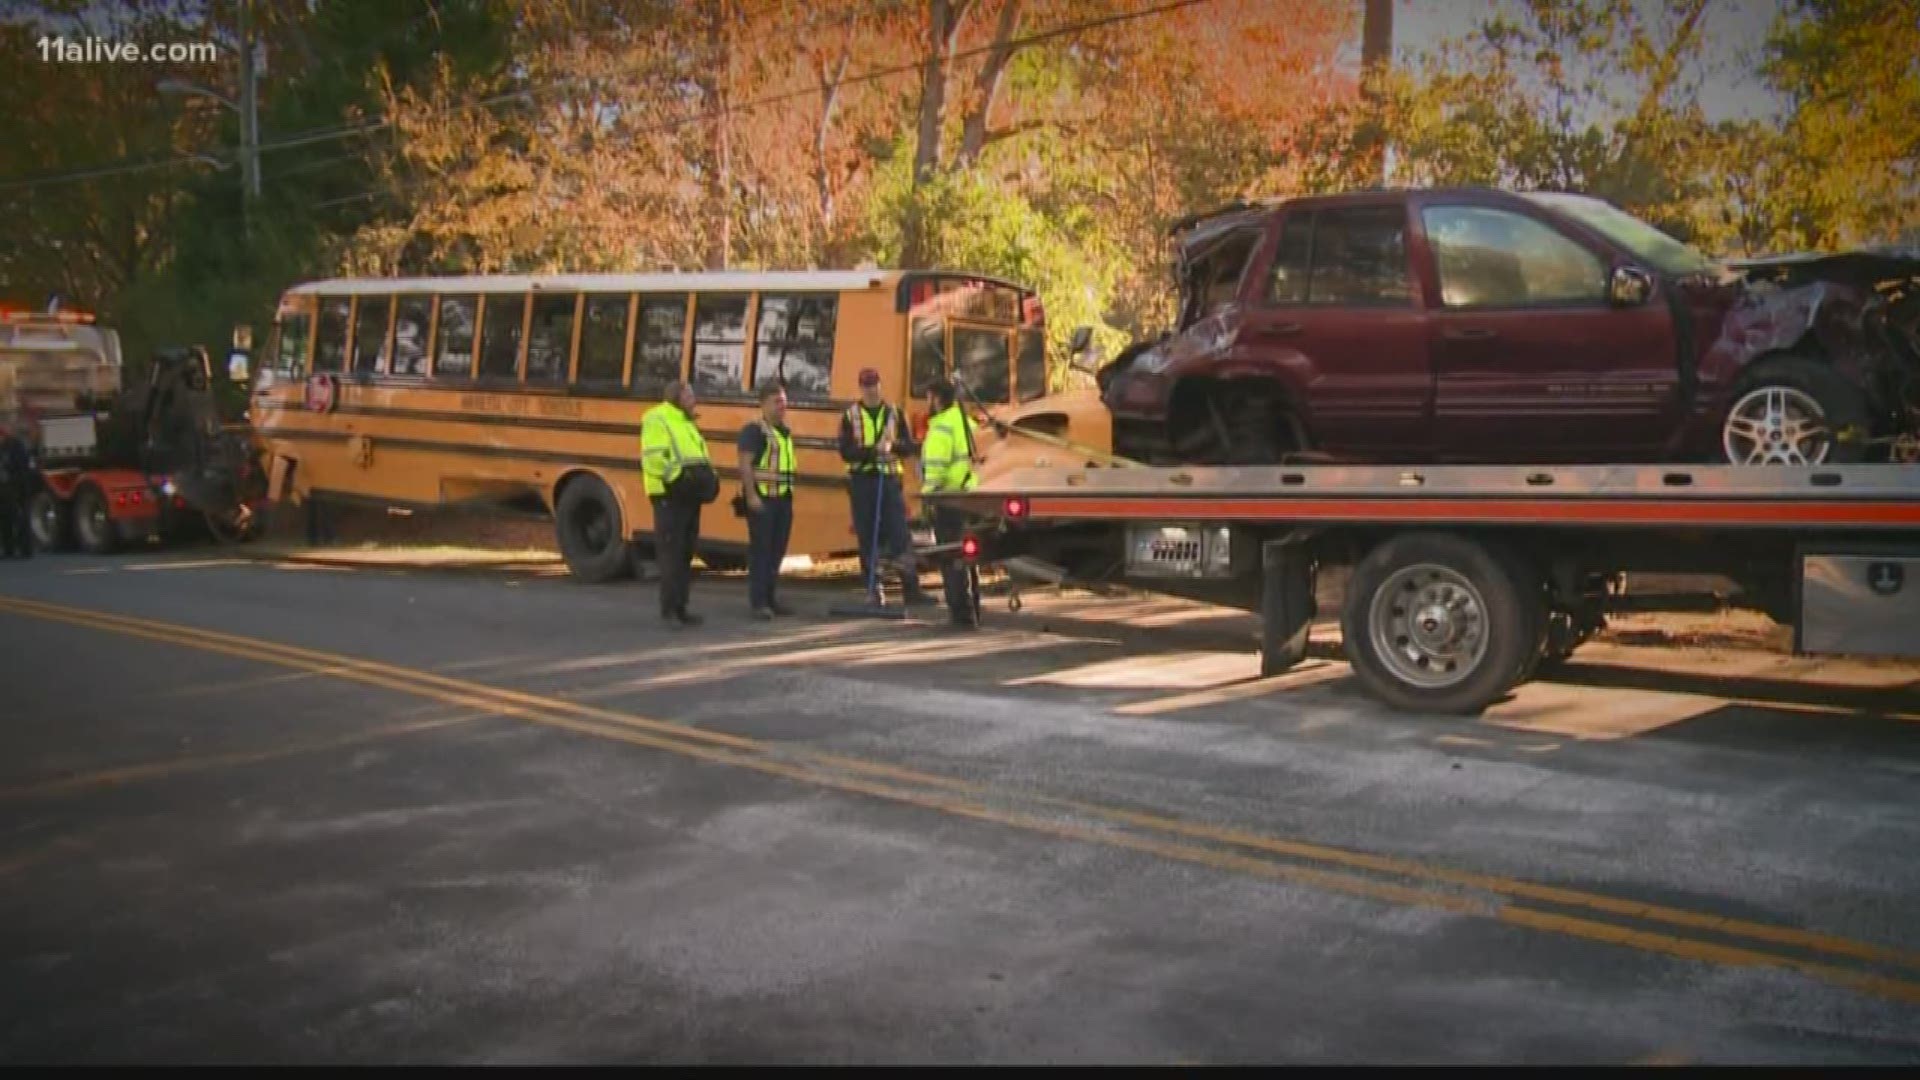 A 16-year-old lost control of his SUV and collided head-on into a school bus in Marietta, Thursday morning, police said.